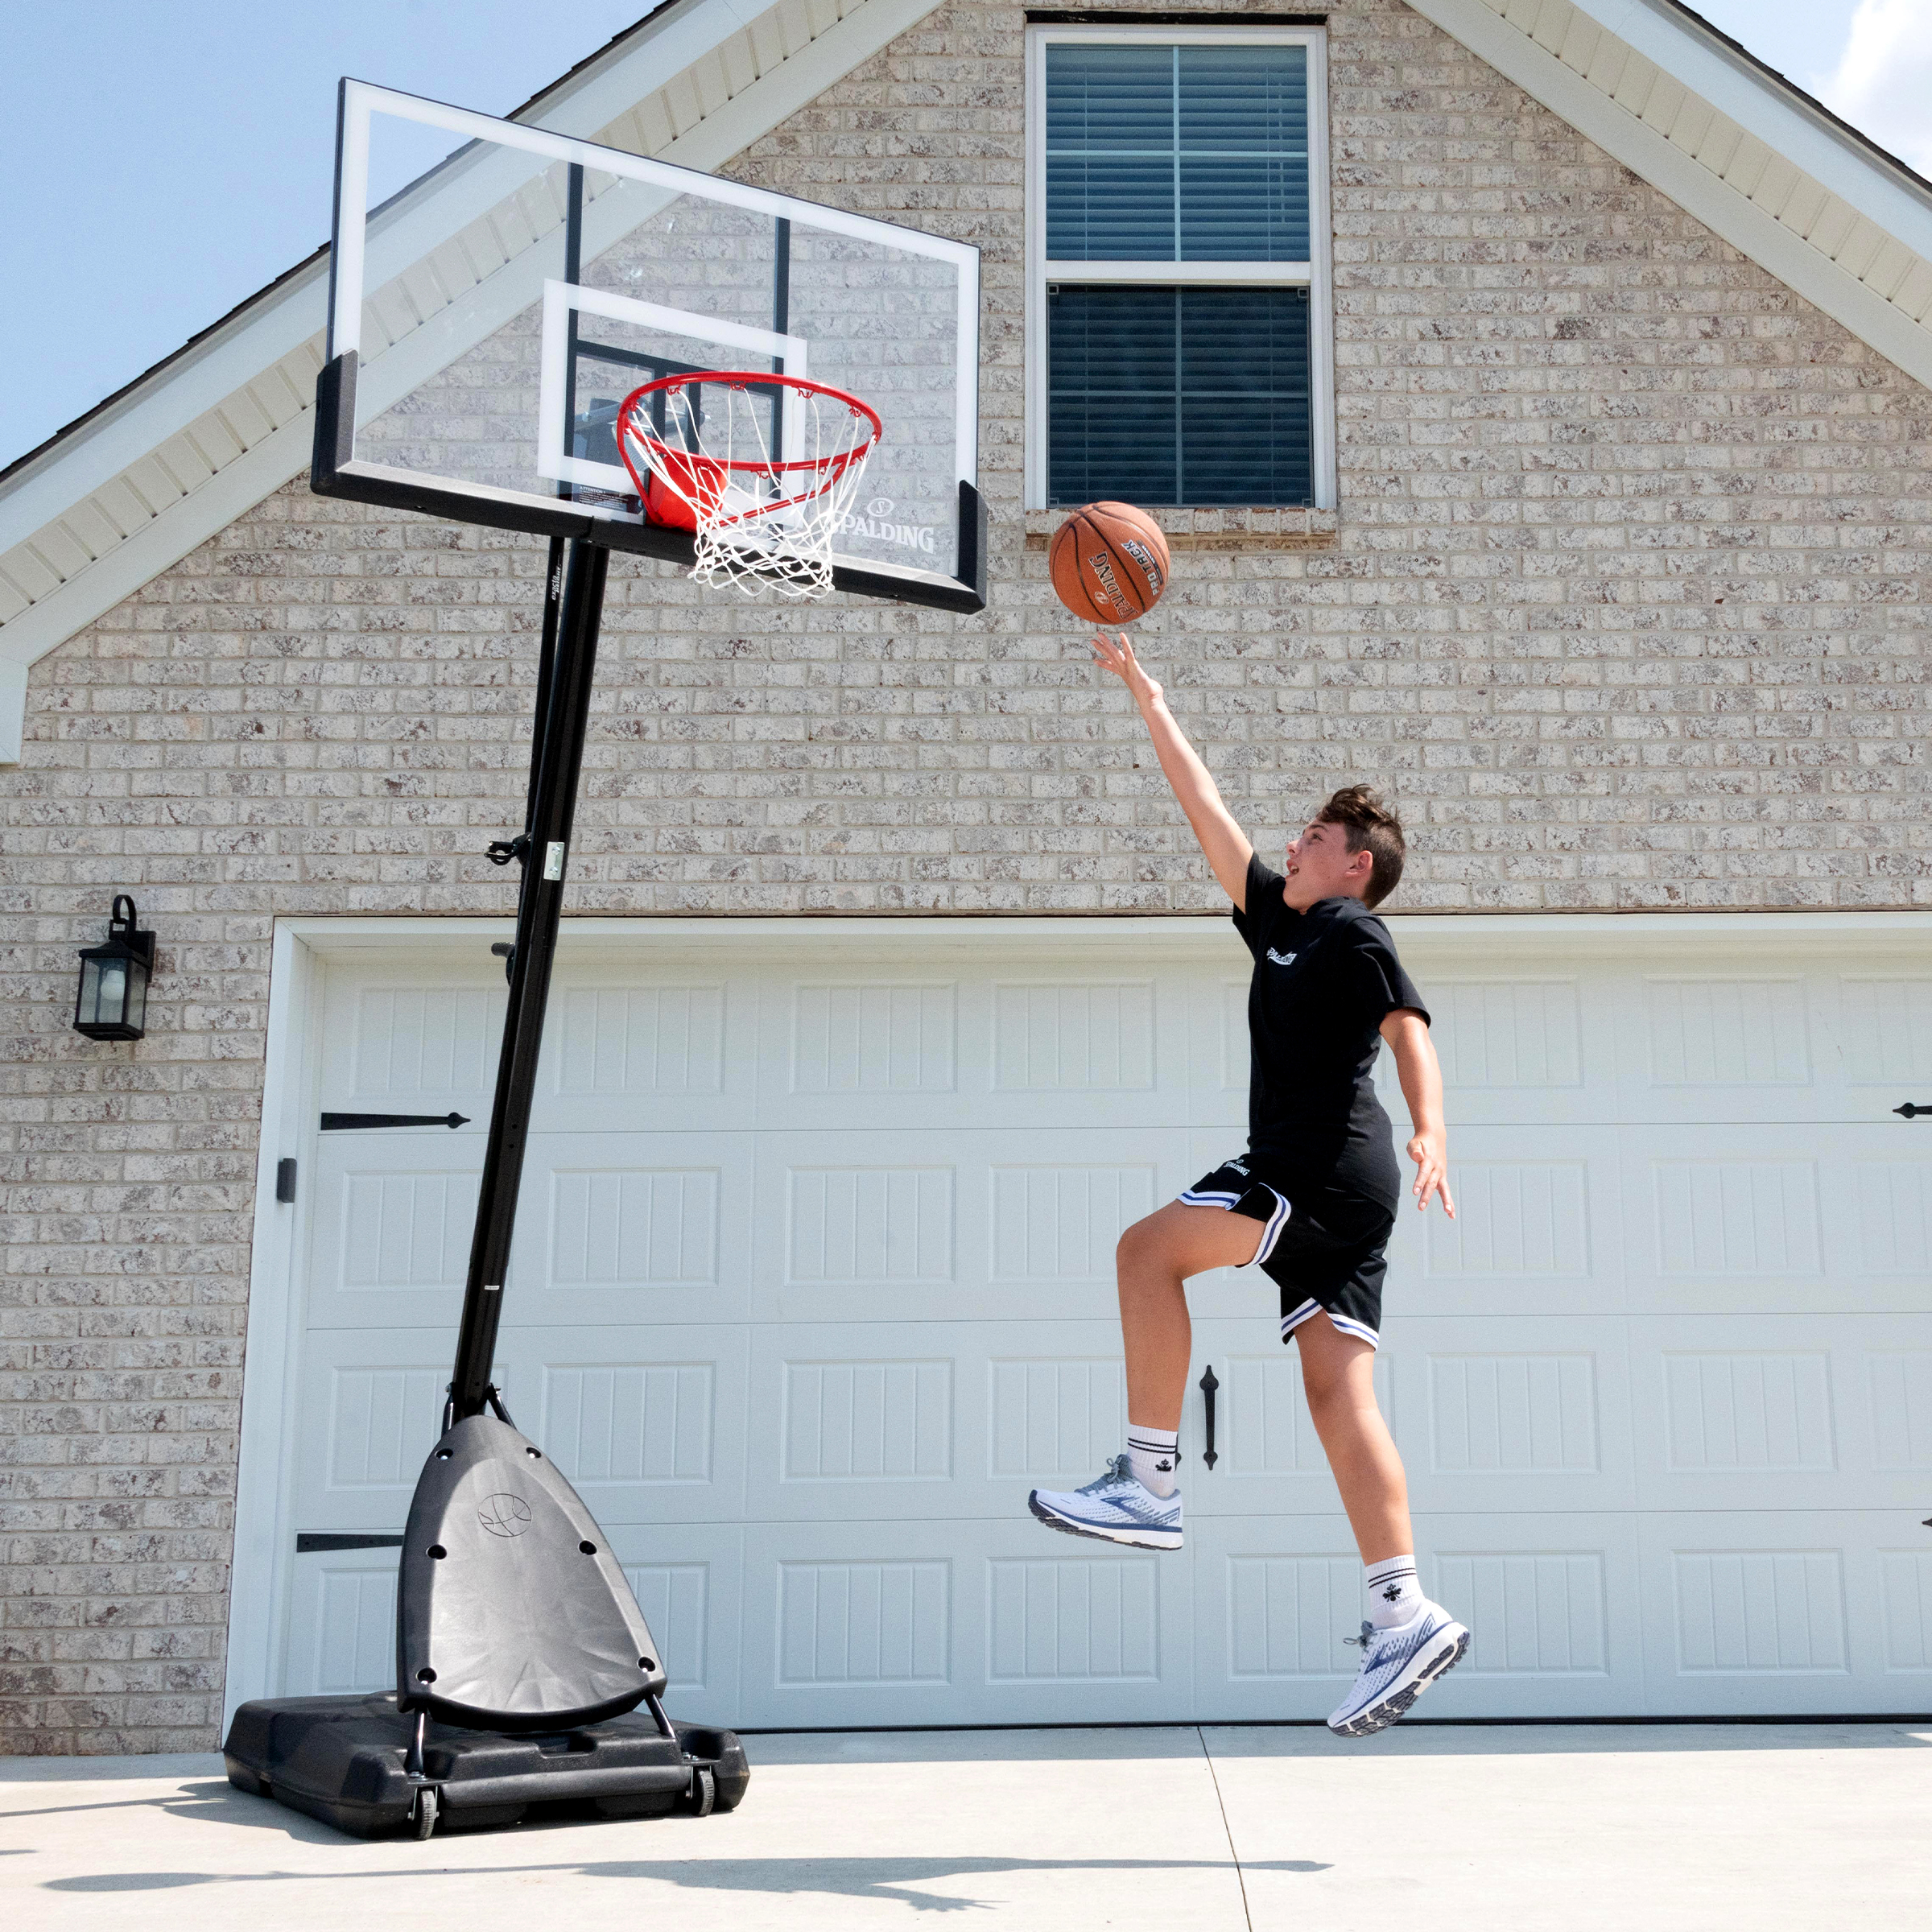 Spalding 54 inch Shatter-proof Polycarbonate Exacta Height® Portable Basketball Hoop System - image 10 of 12